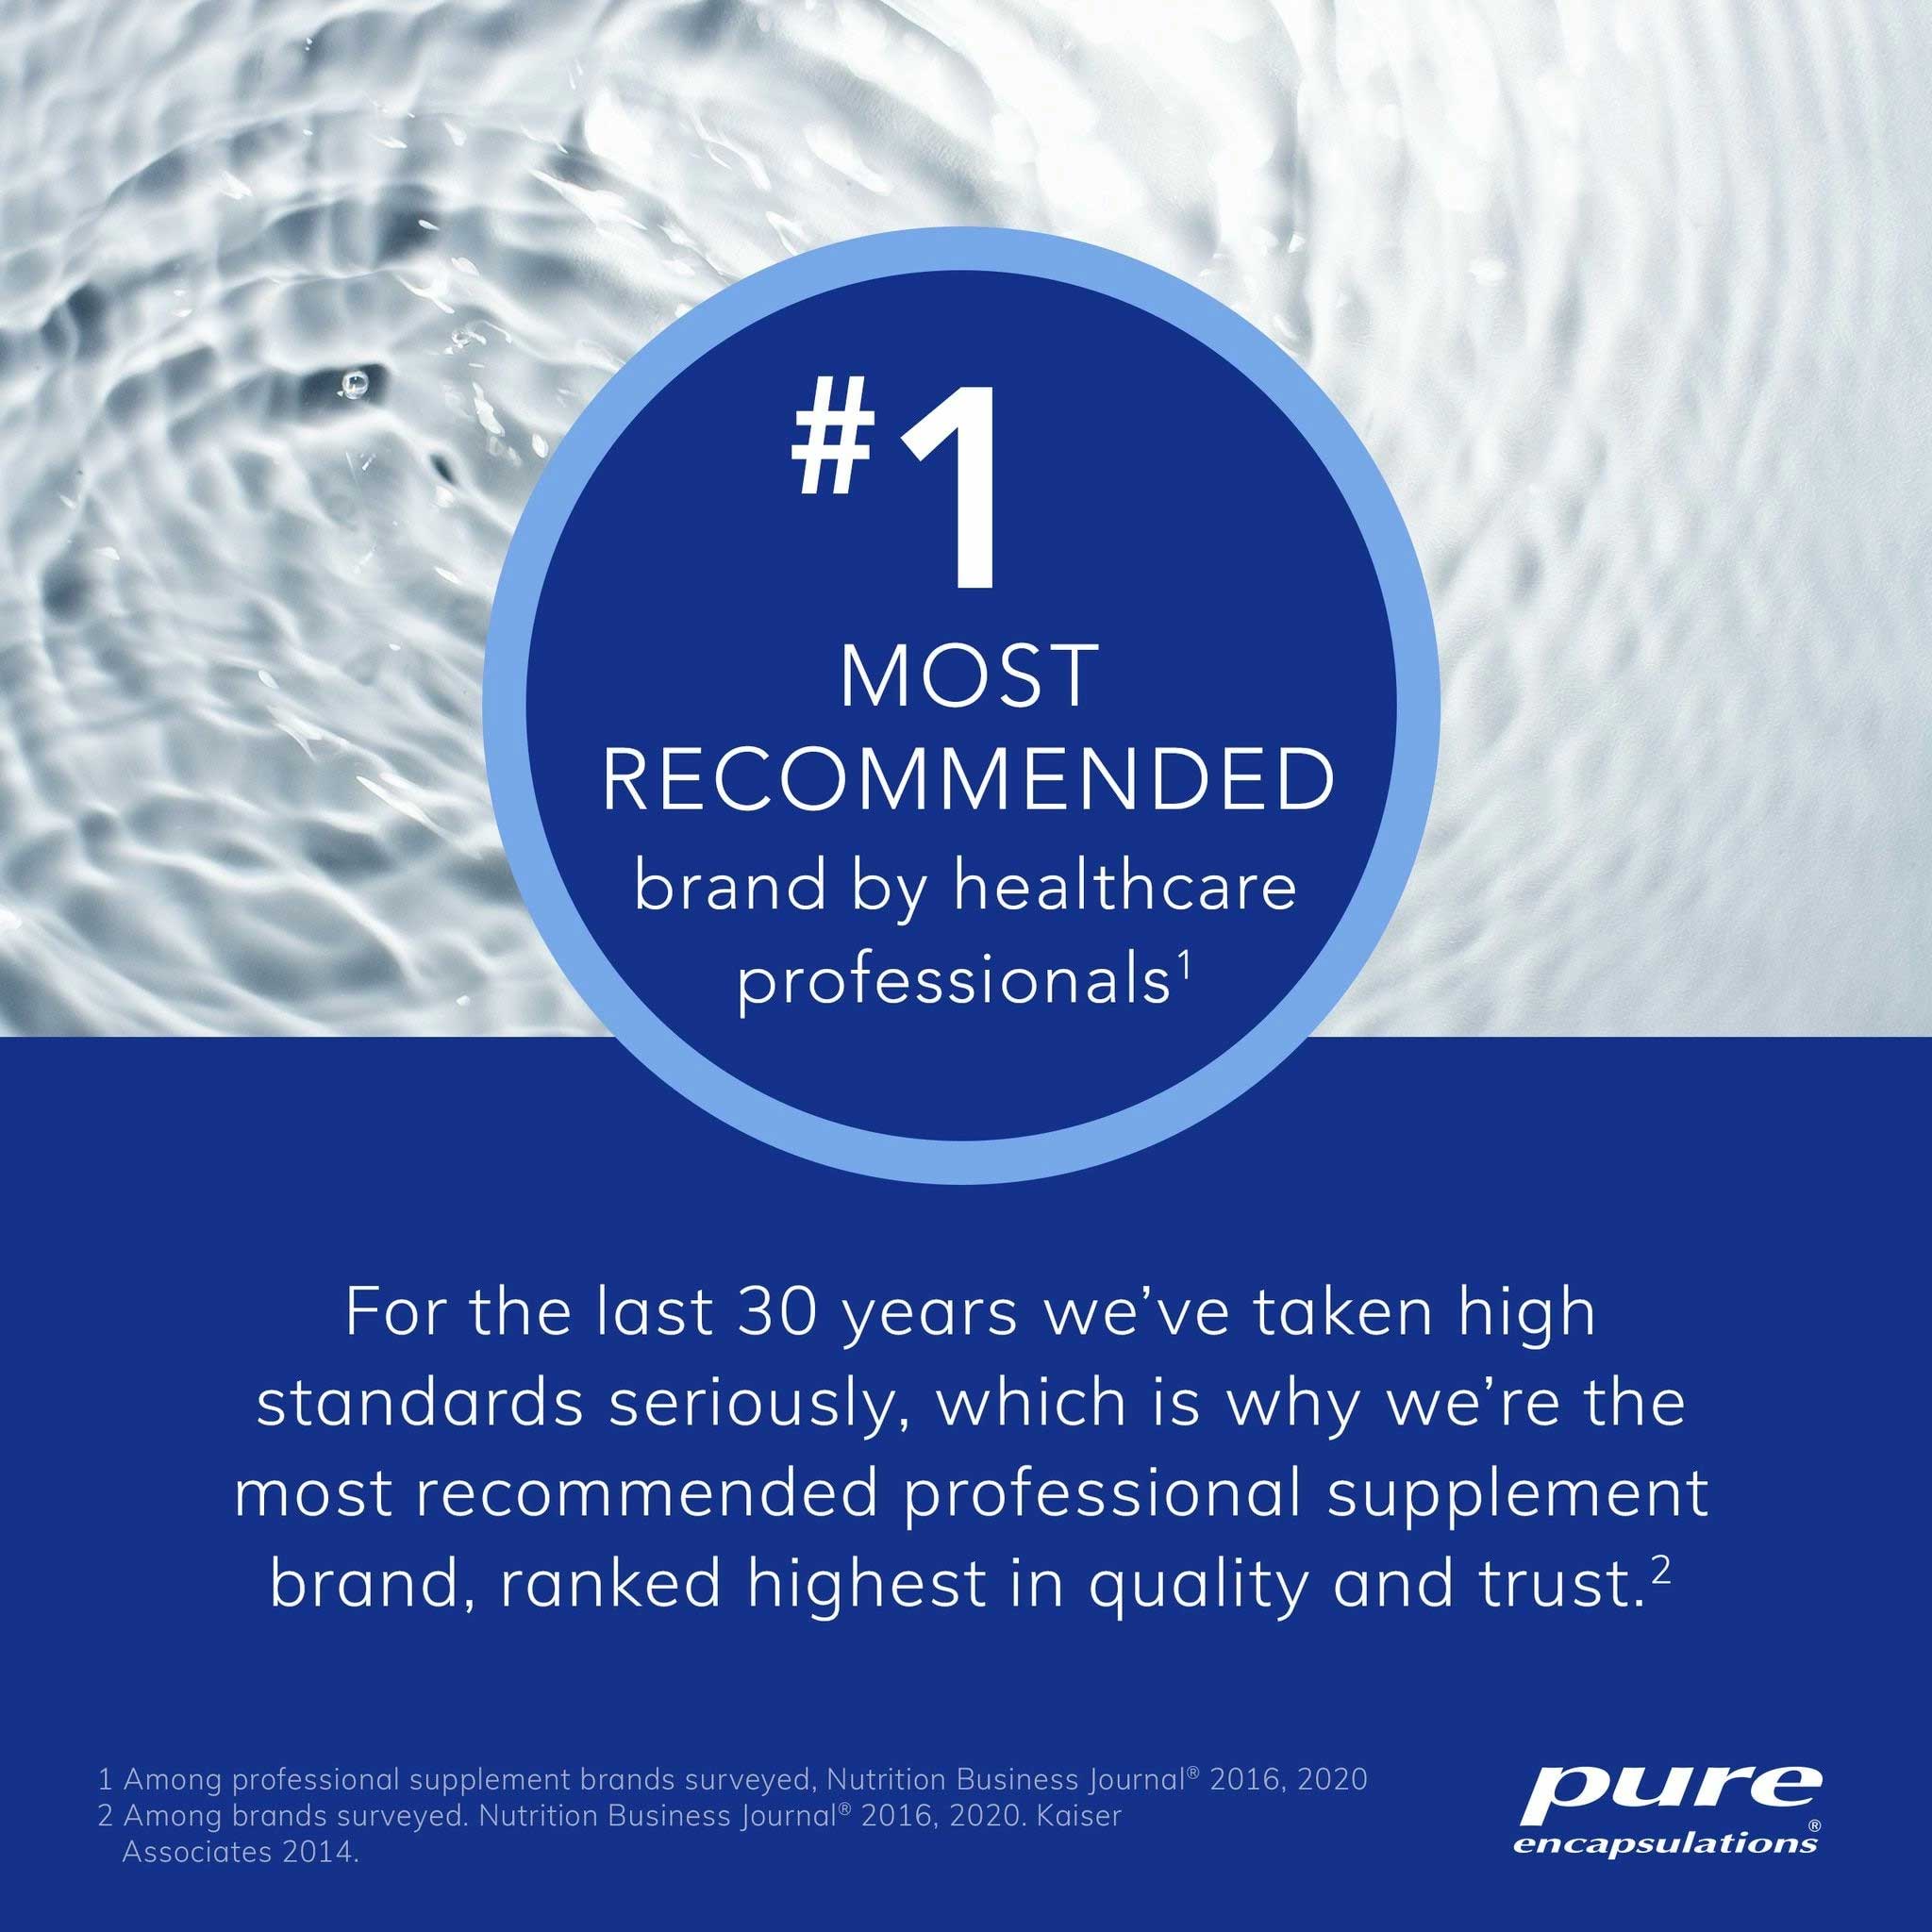 Pure Encapsulations Uric Acid Formula Most Recommended Brand